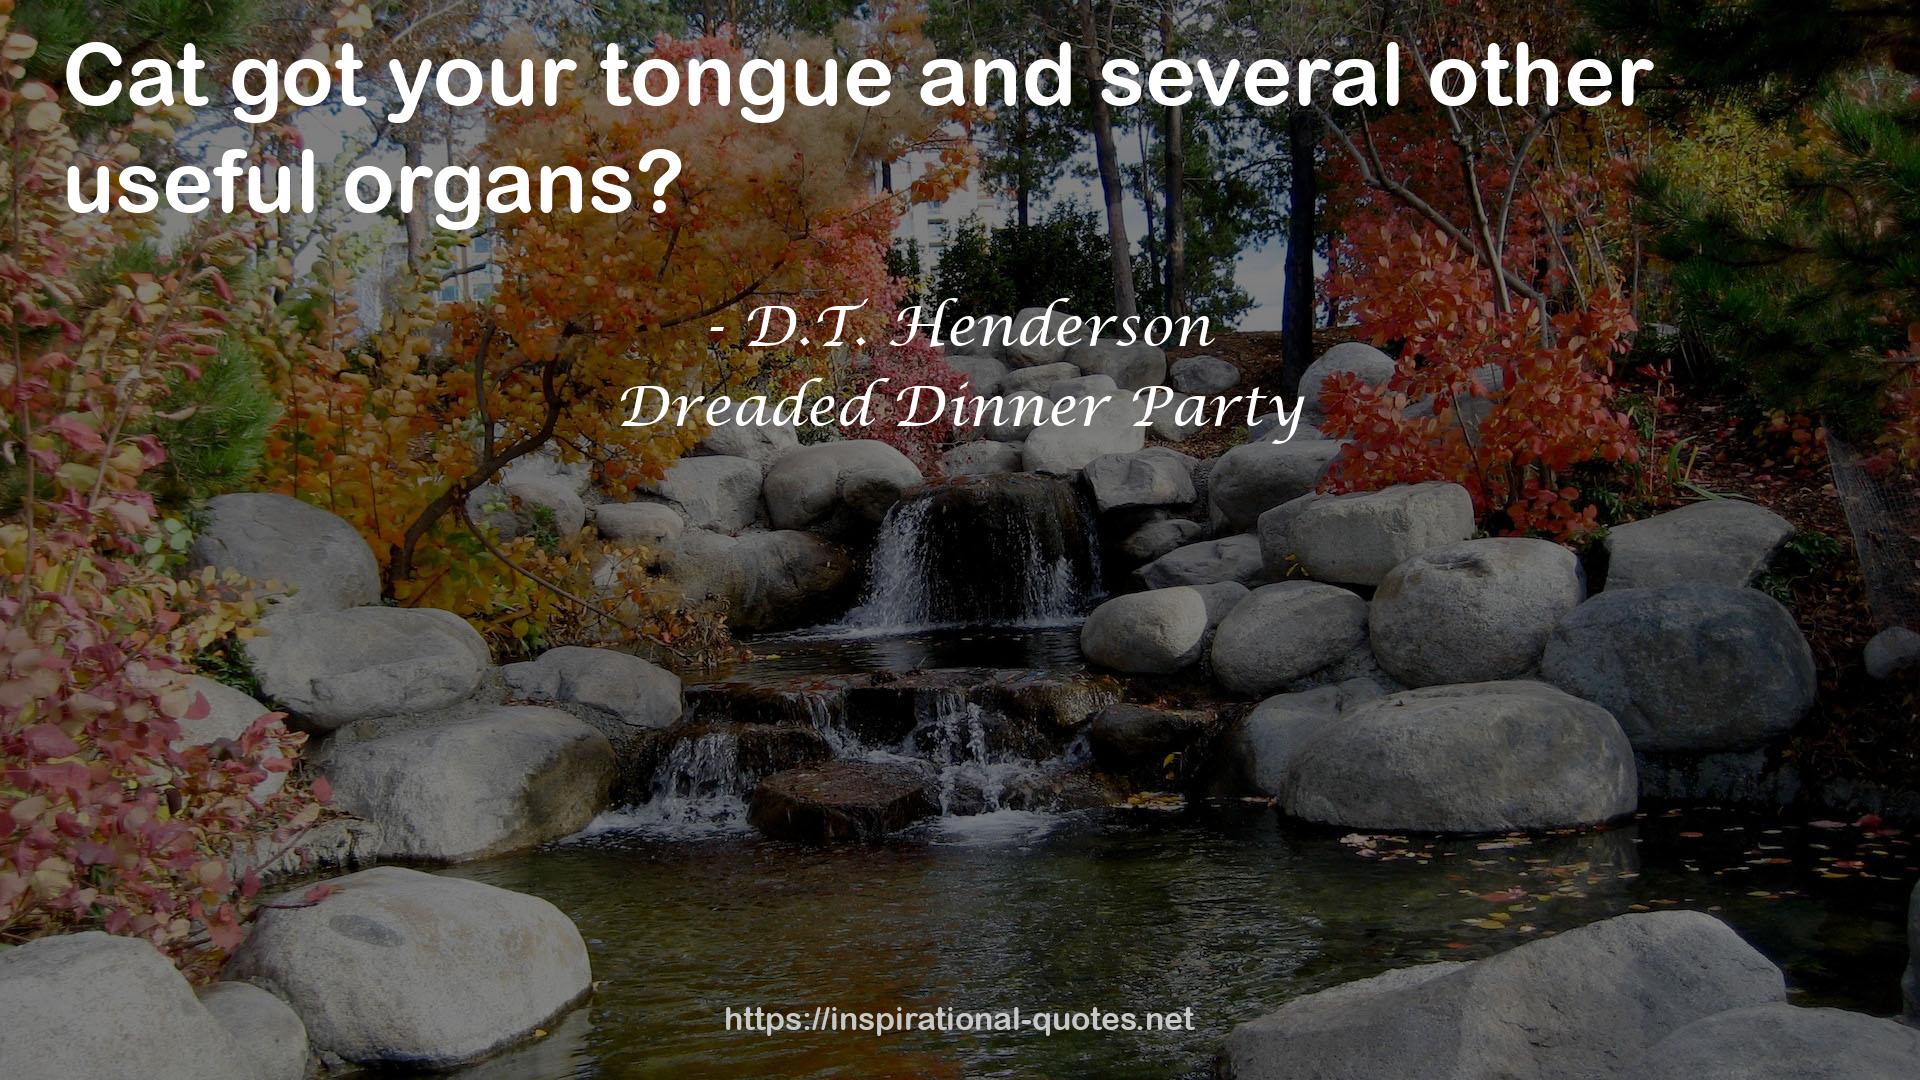 Dreaded Dinner Party QUOTES